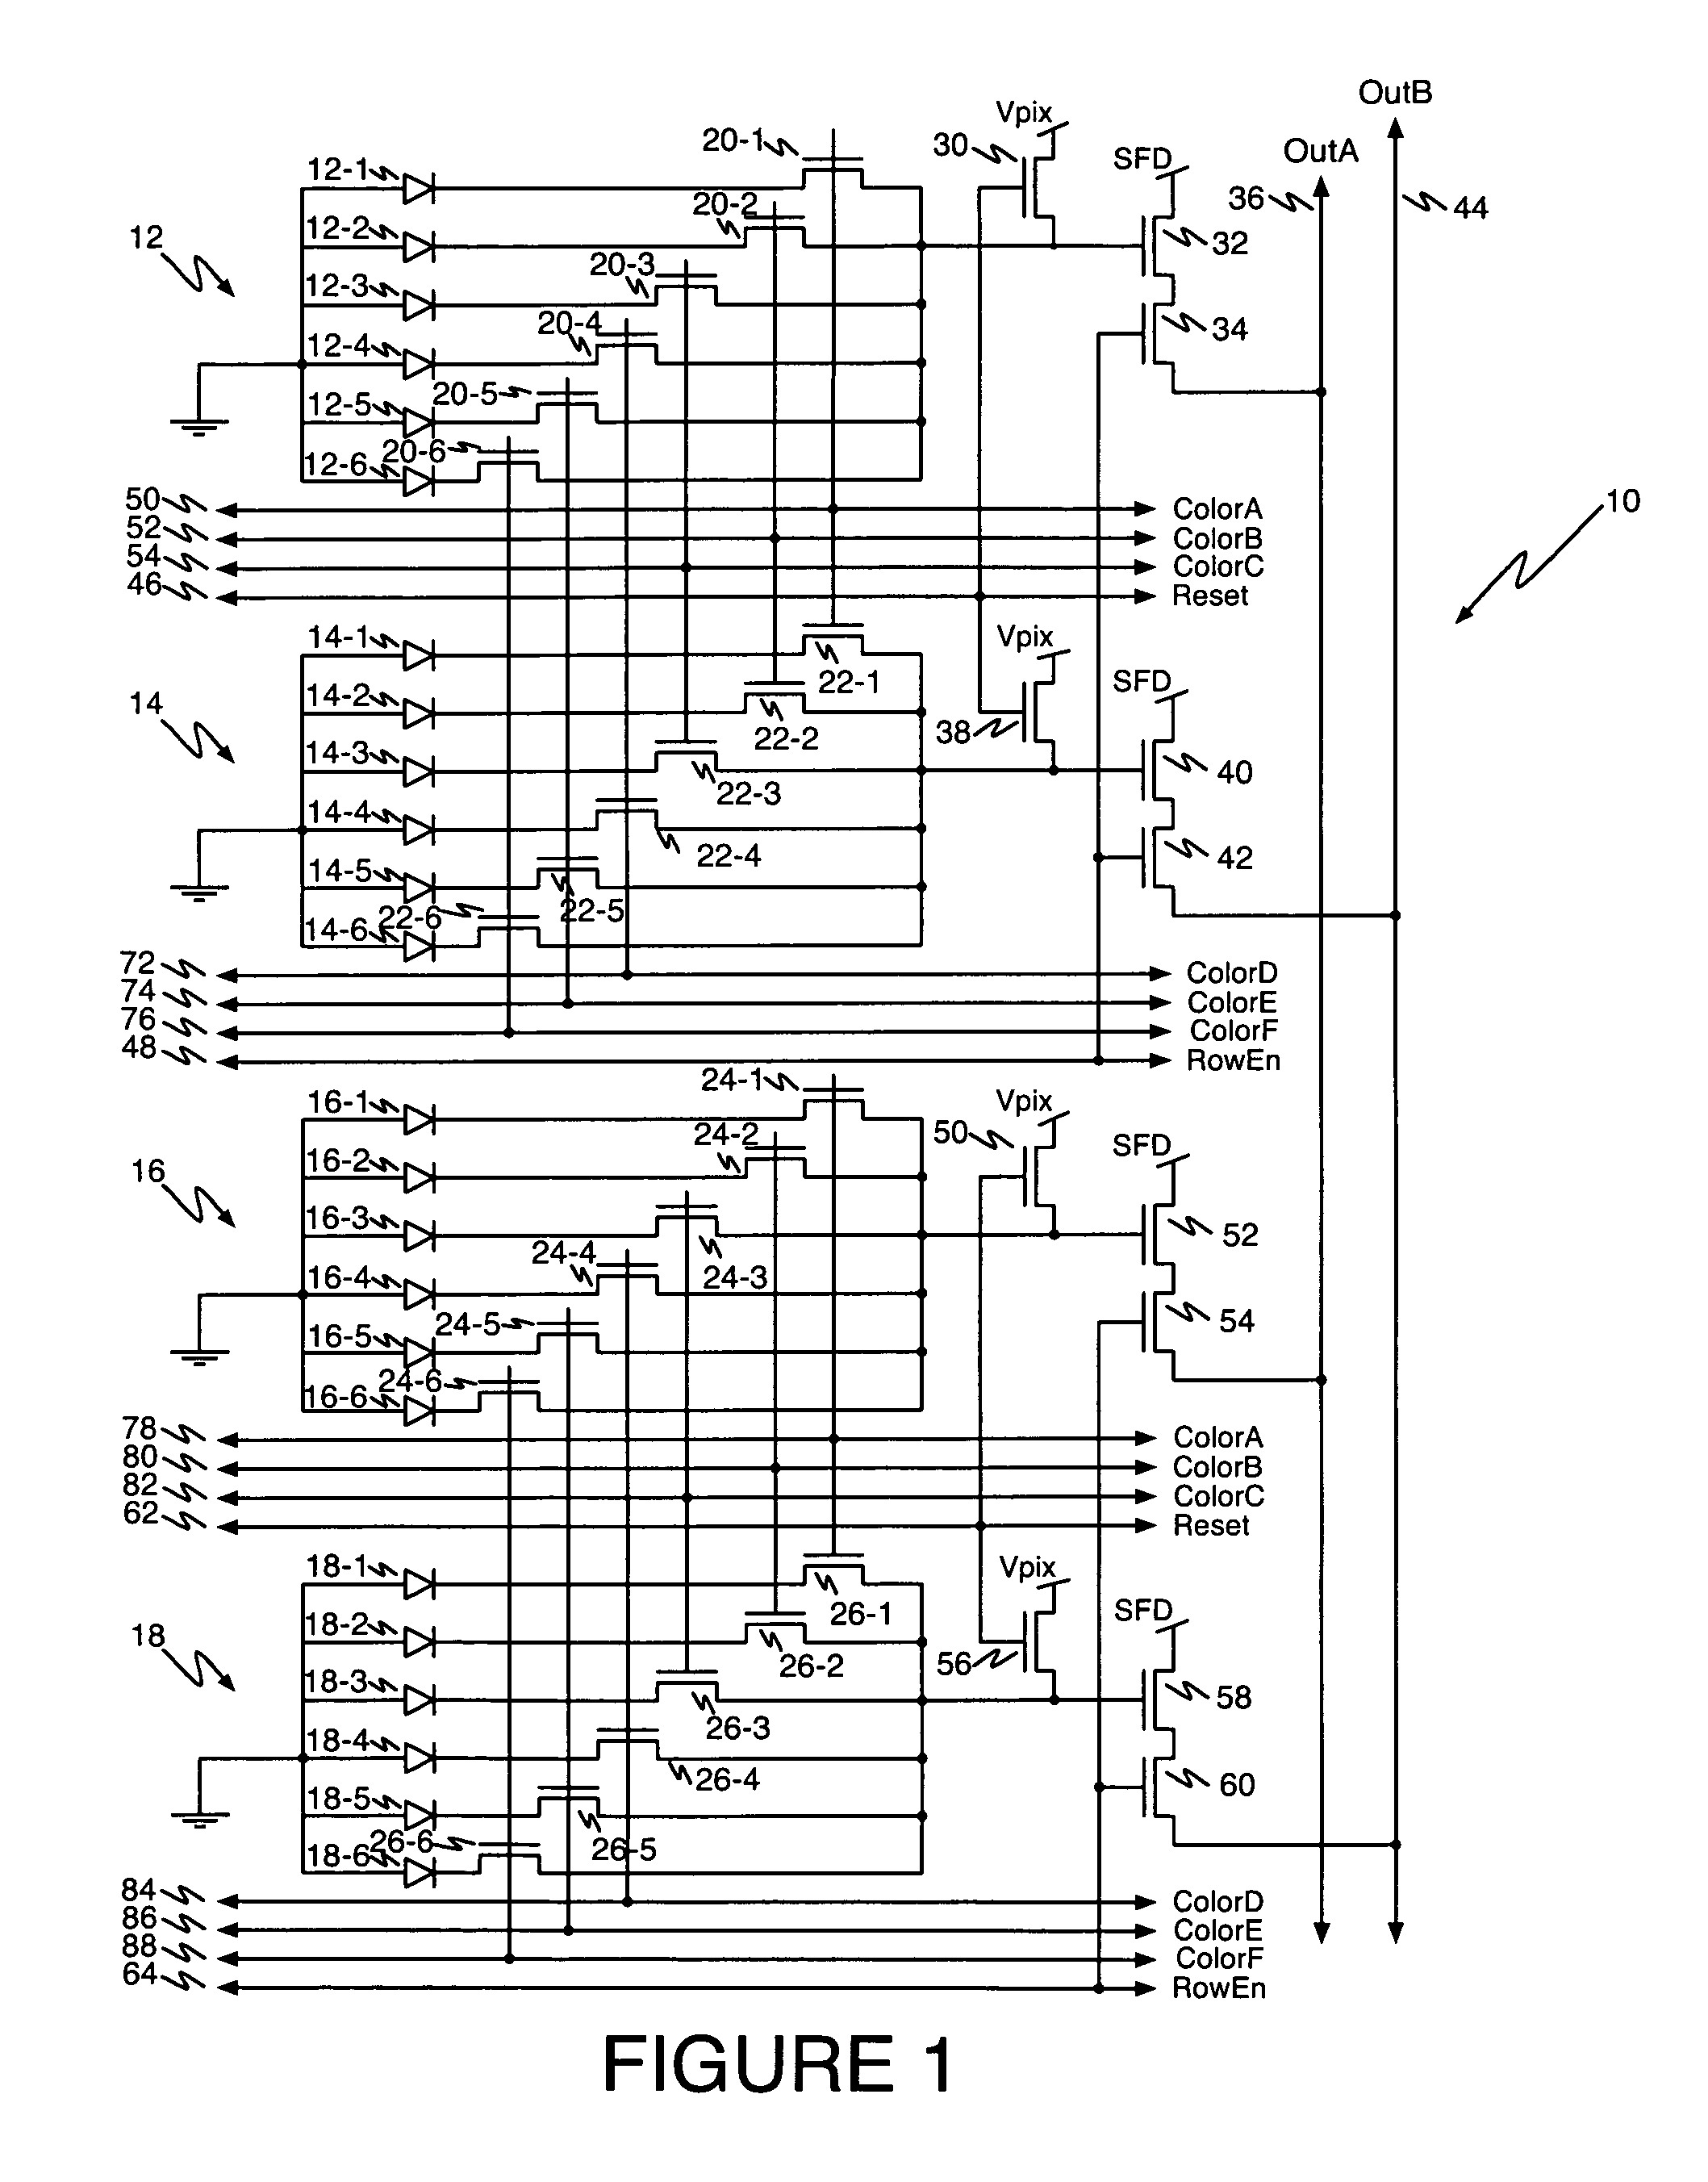 Multi-color CMOS pixel sensor with shared row wiring and dual output lines